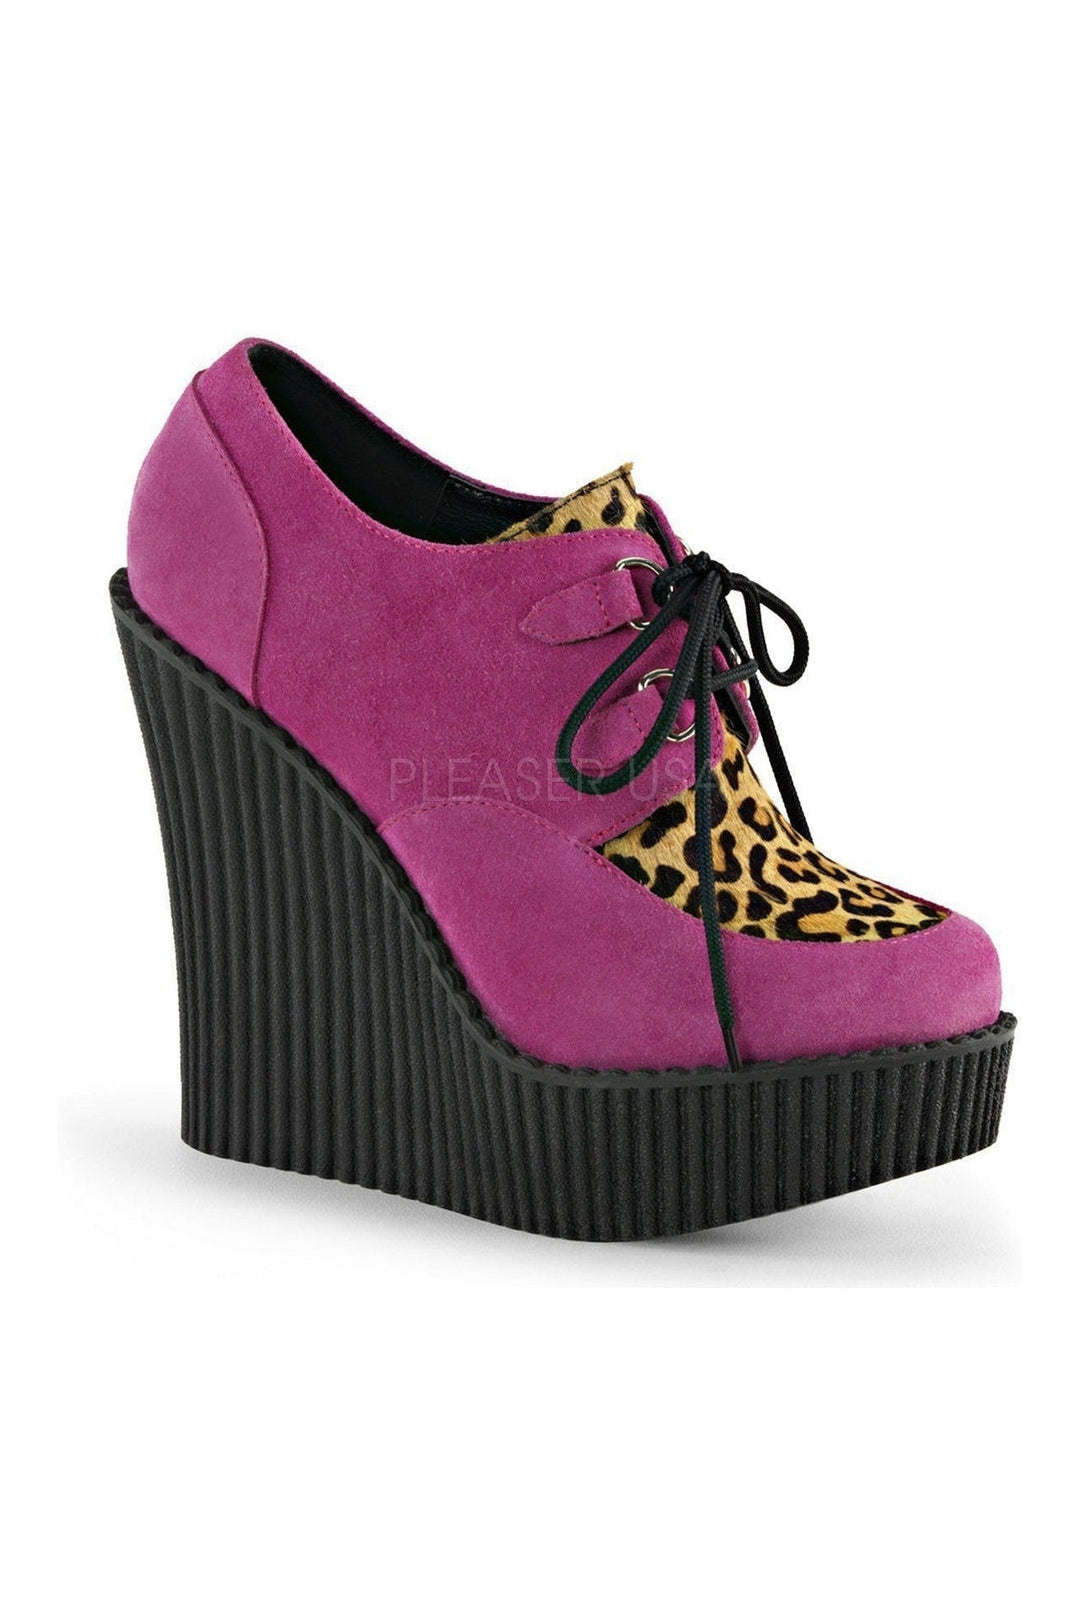 CREEPER-304 Demonia Wedge | Leopard Faux Suede-Demonia-Animal-Creepers-SEXYSHOES.COM